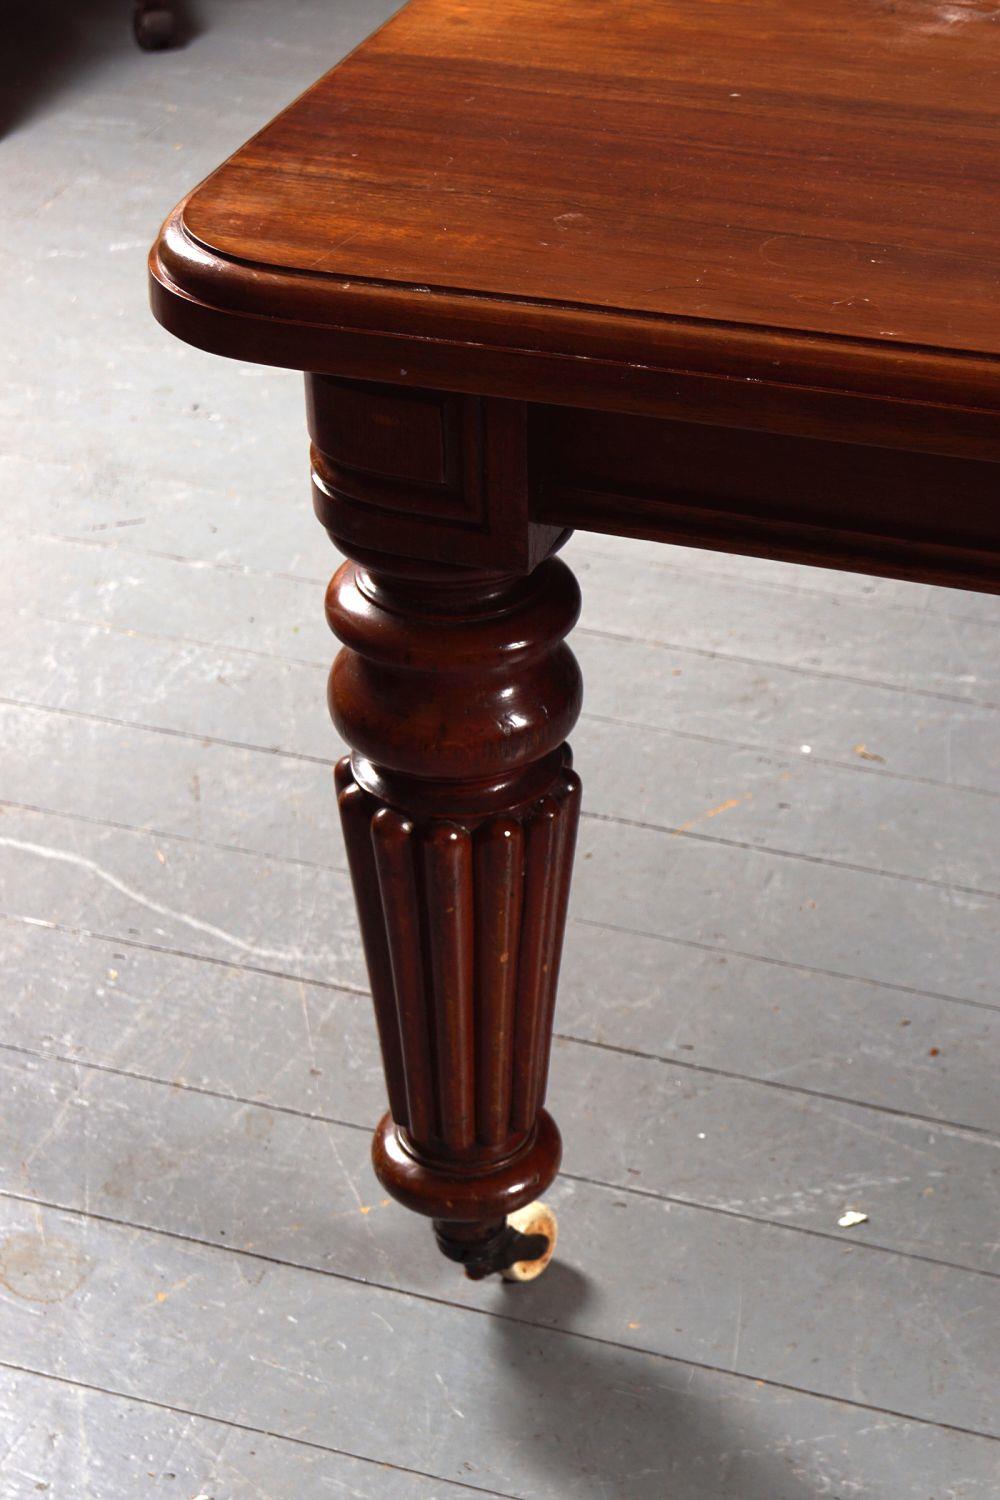 LARGE 19TH-CENTURY MAHOGANY DINING TABLE - Image 3 of 4